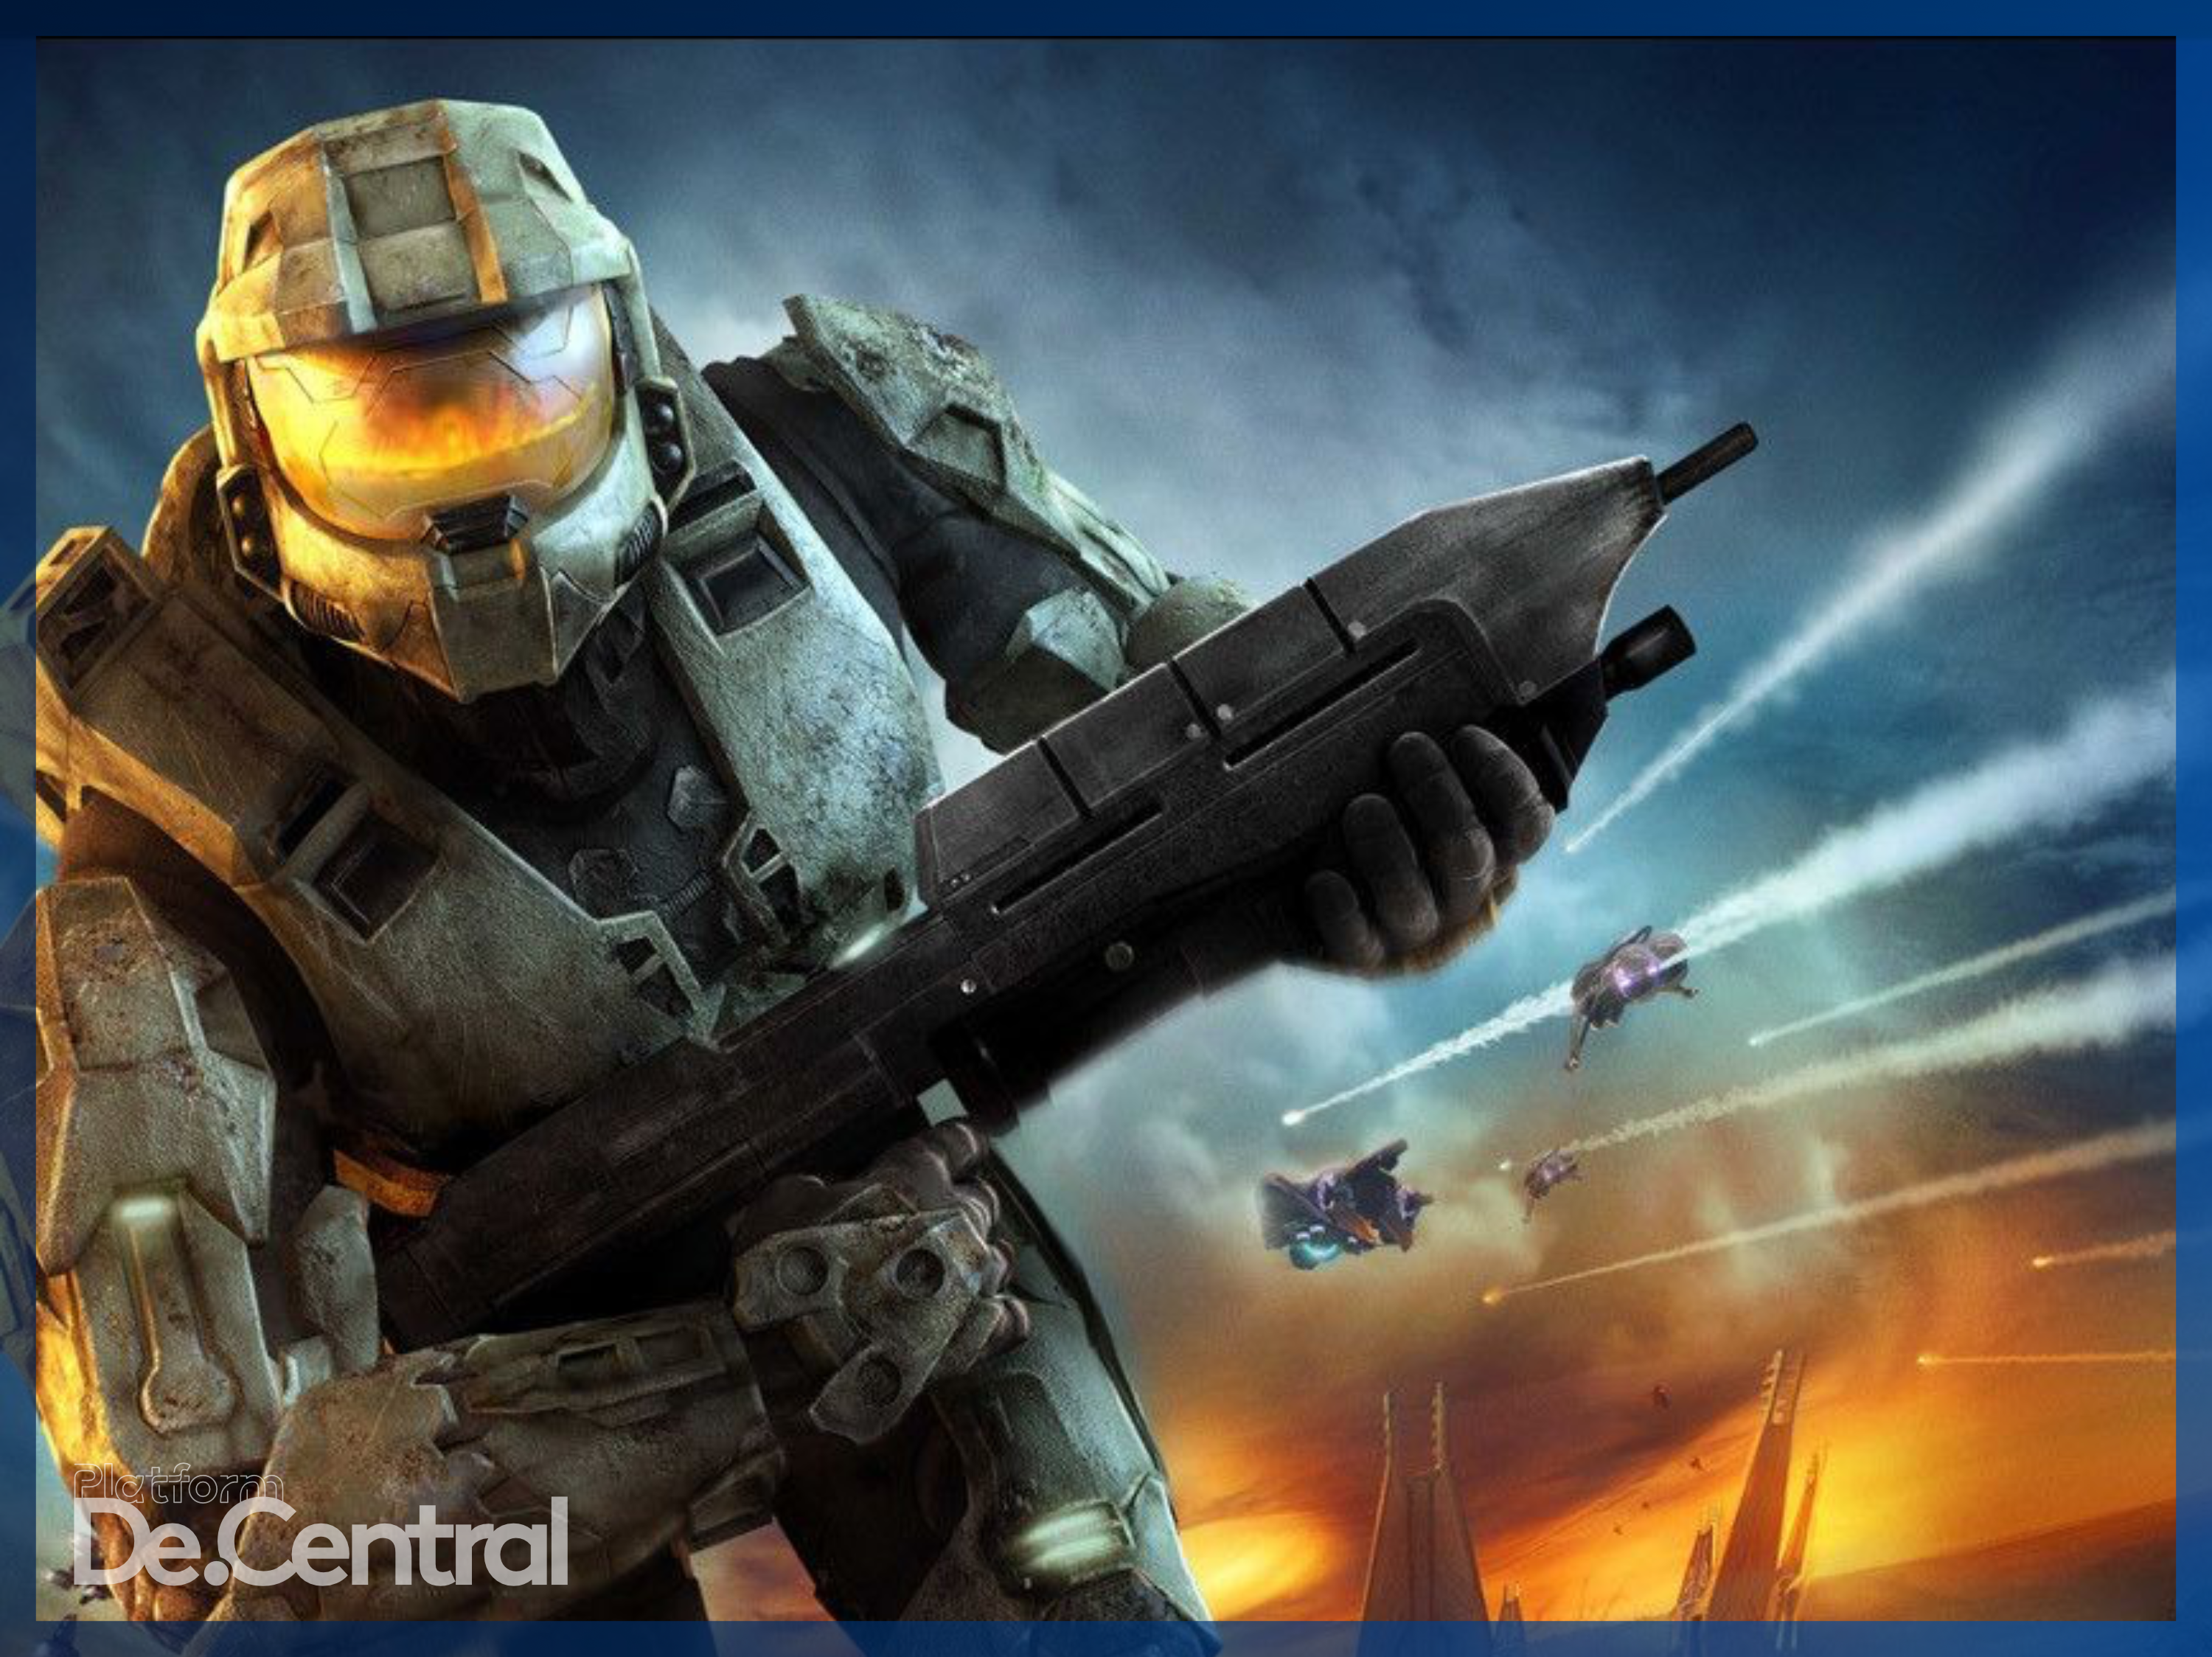 Halo 3 for PC flights to begin in June